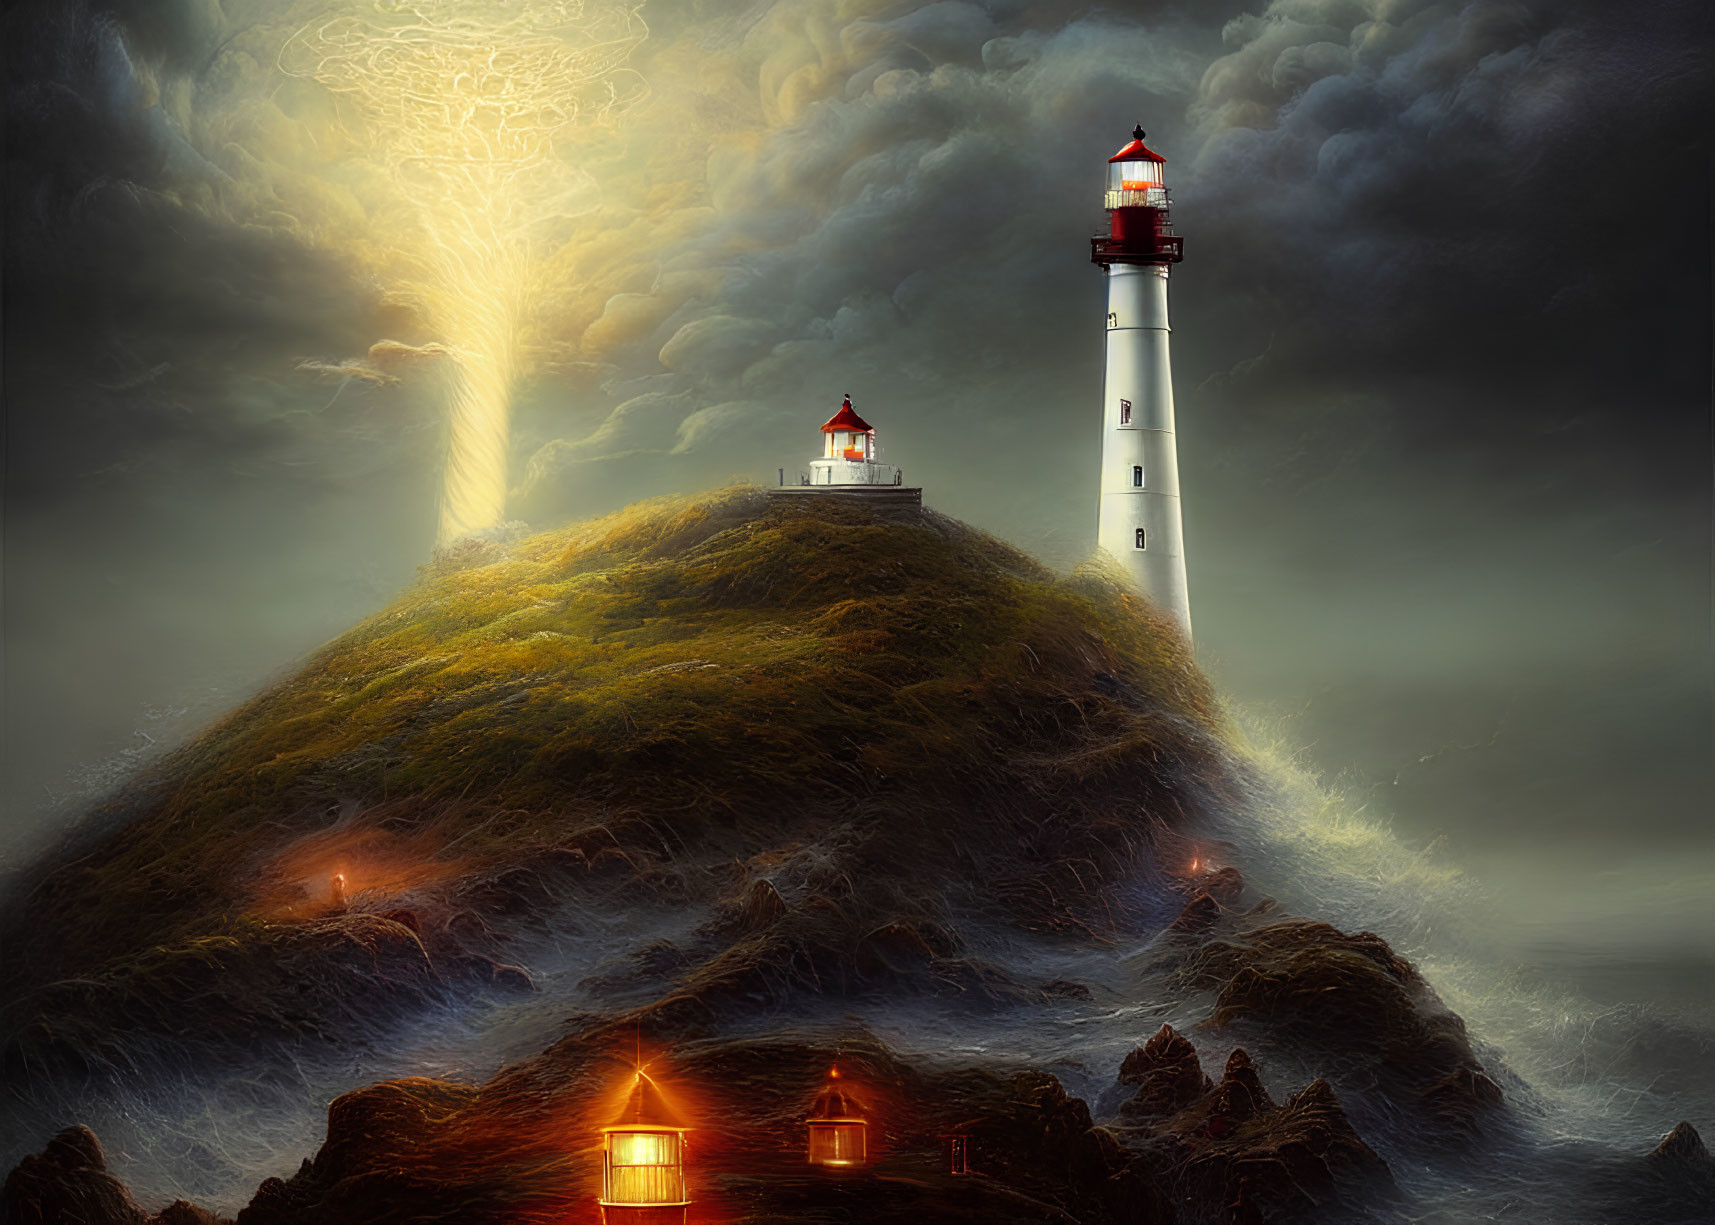 Lighthouse on lush hill in stormy seas with glowing sky patterns